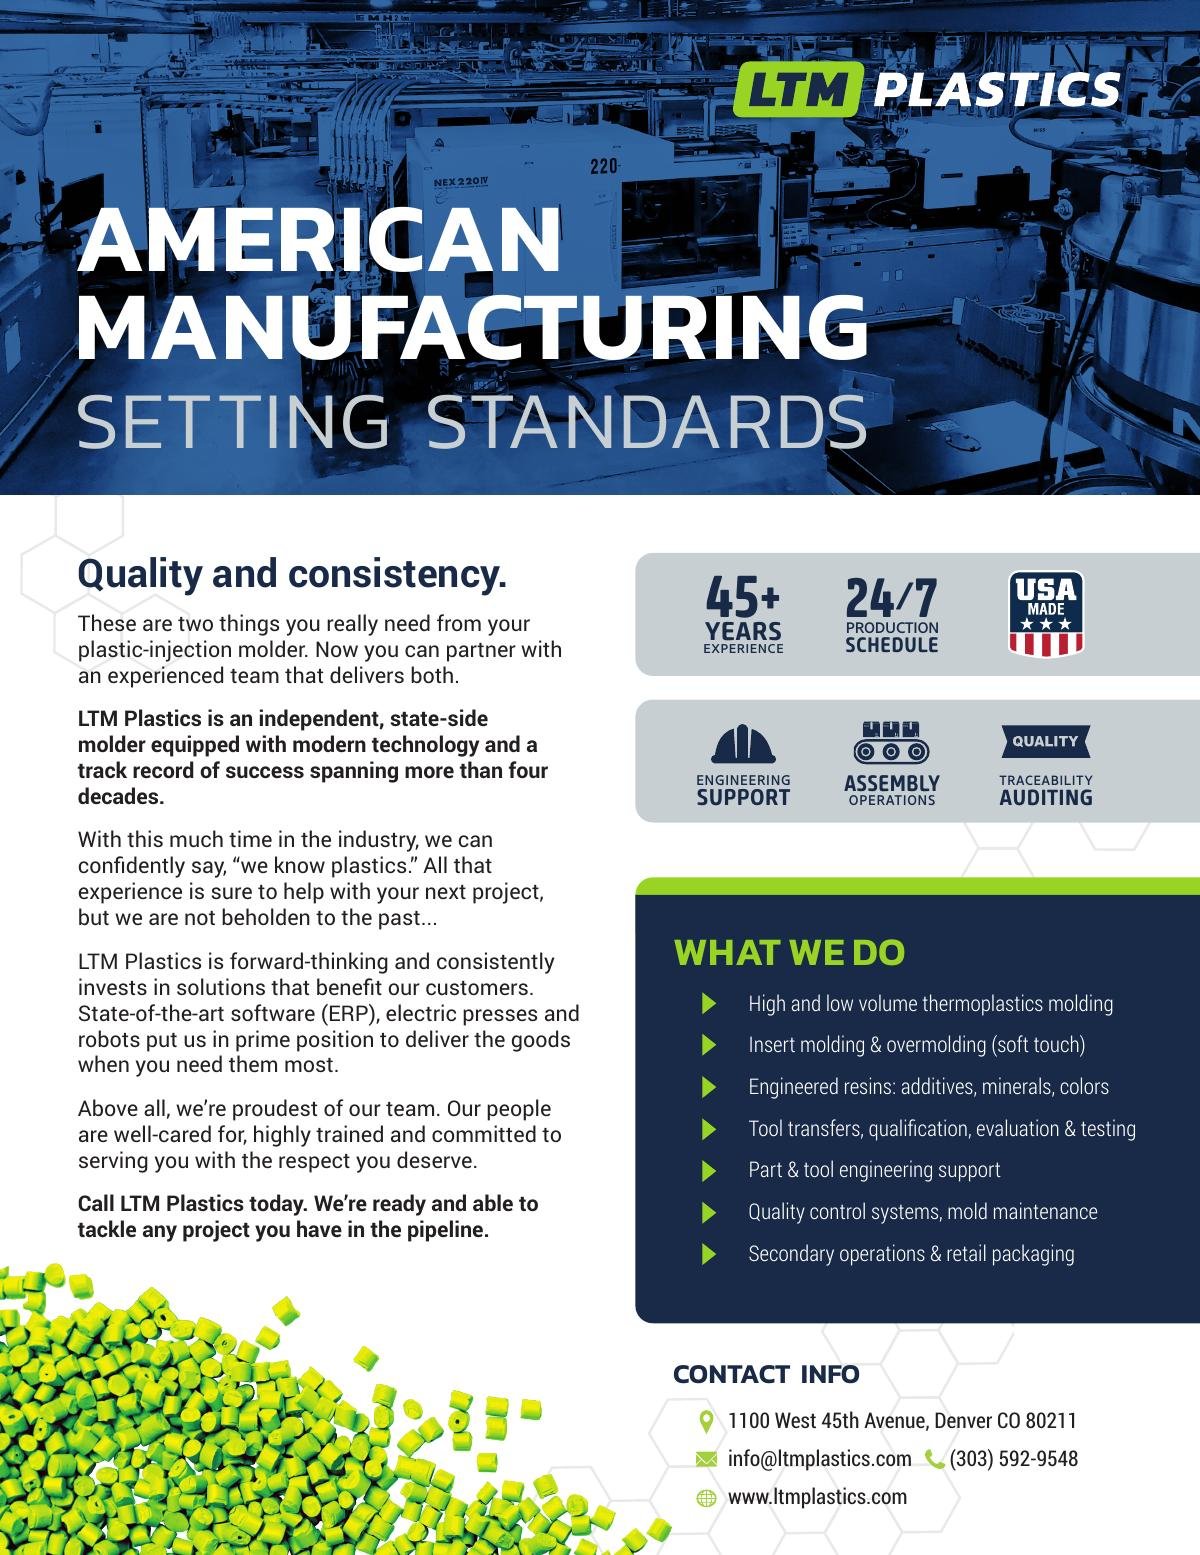 American Manufacturing: Setting Standards